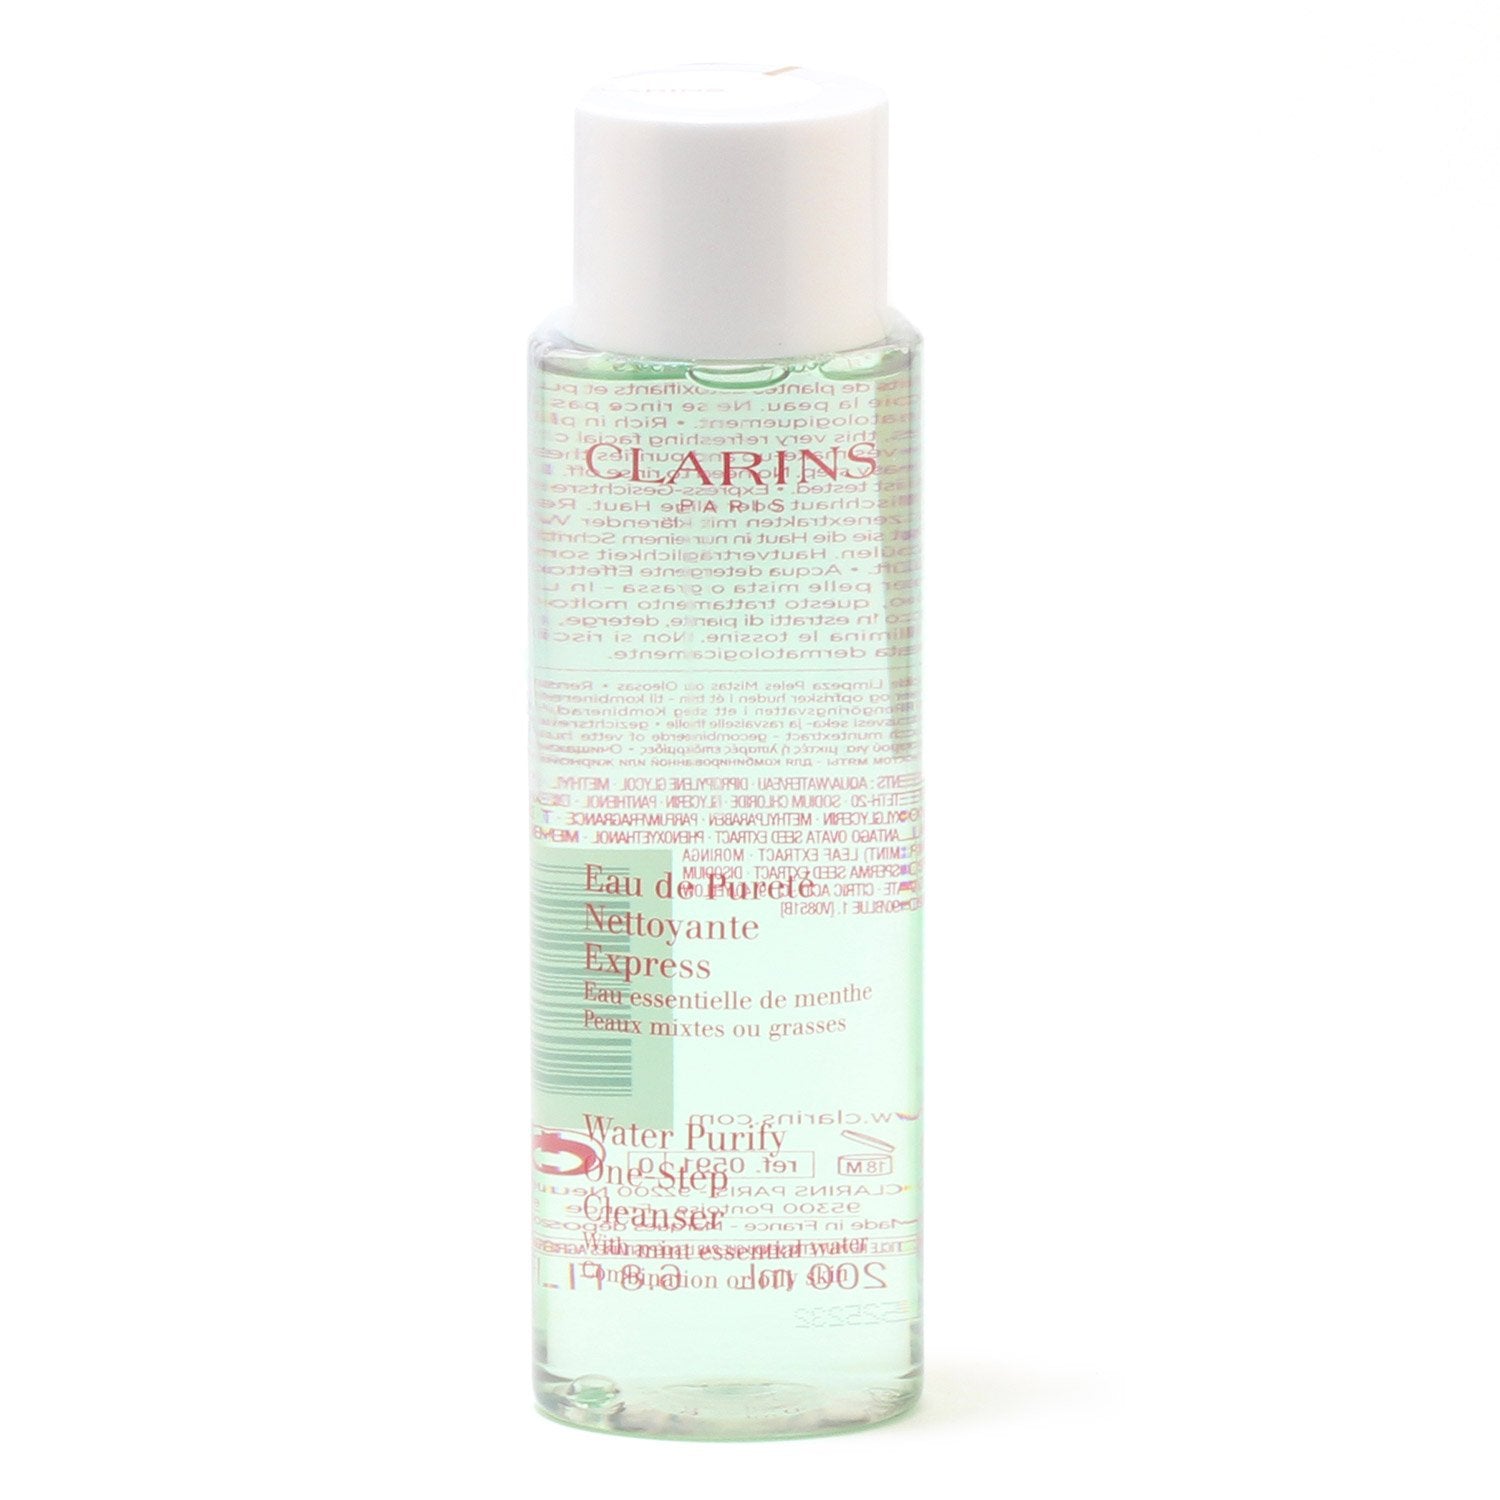 Skin Care - CLARINS WATER-PURIFY ONE-STEP CLEANSER WITH MINT ESSENTIAL WATER, 6.8 OZ